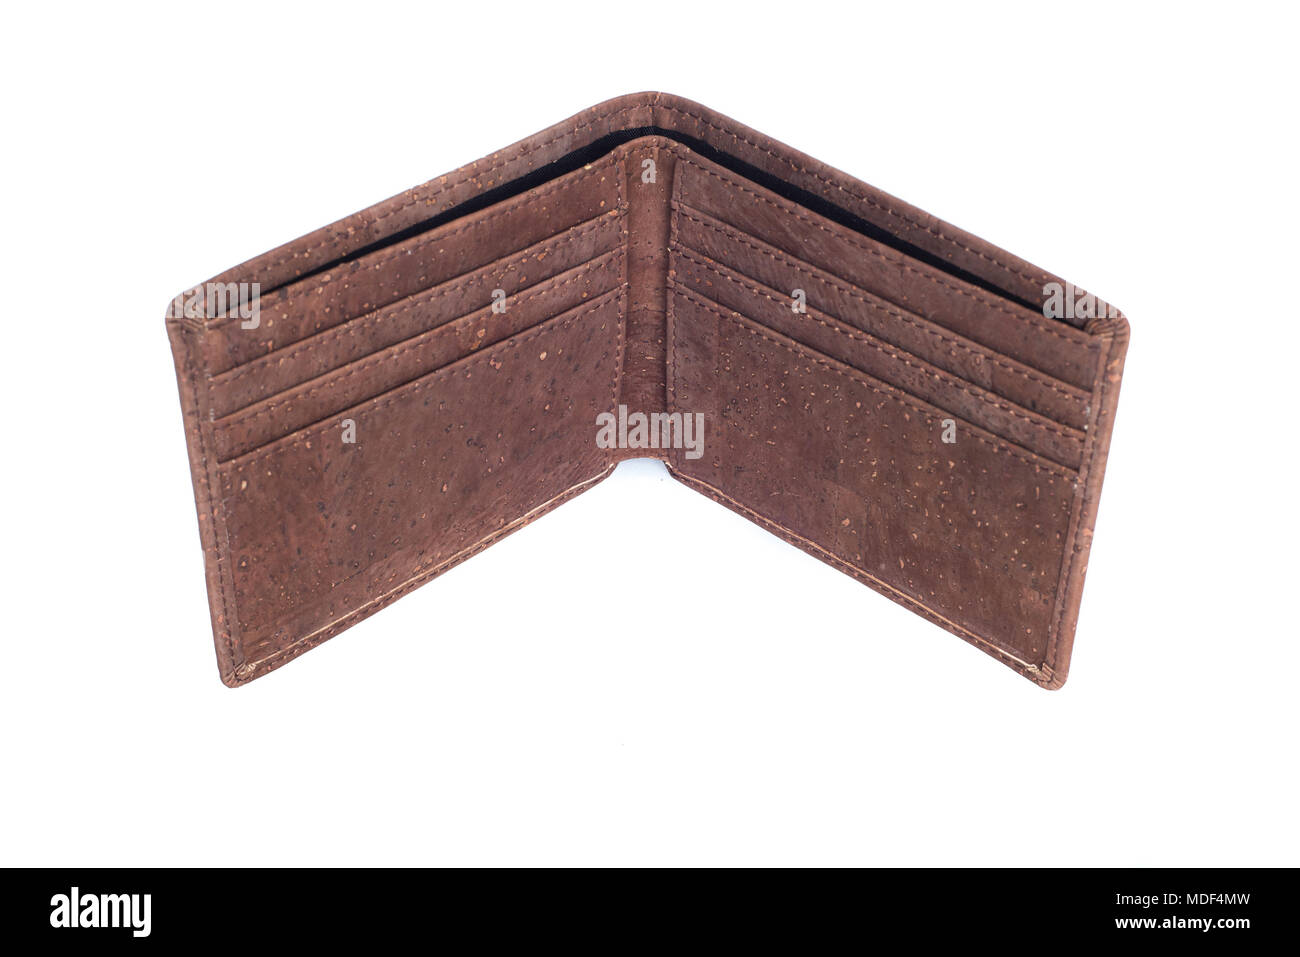 Mens Wallet cash book or purse Stock Photo